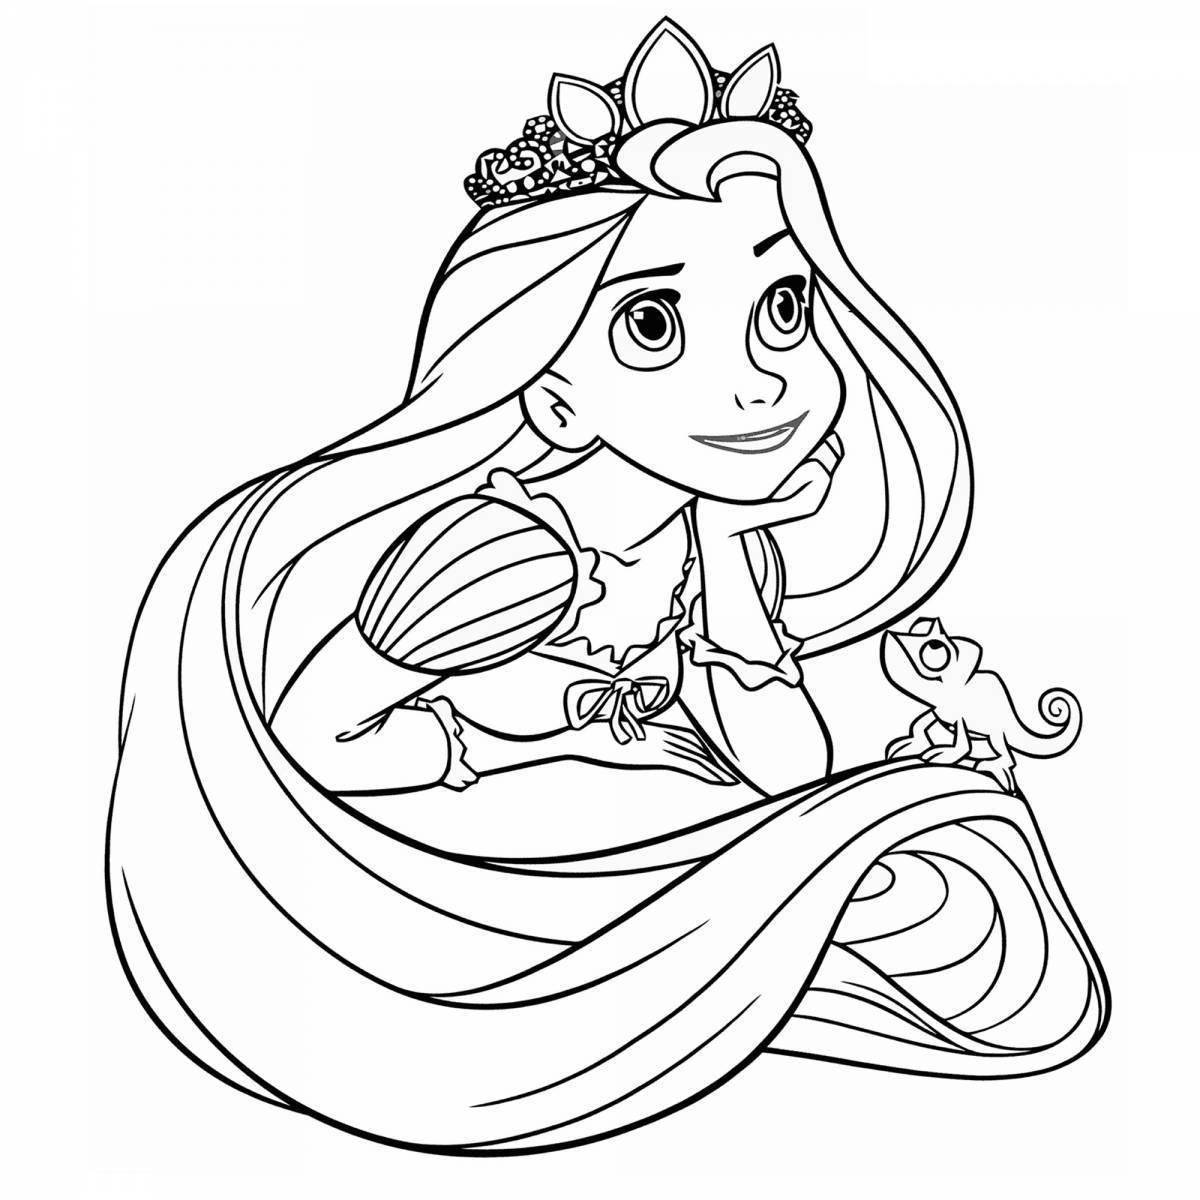 Tangled dazzling coloring book for girls